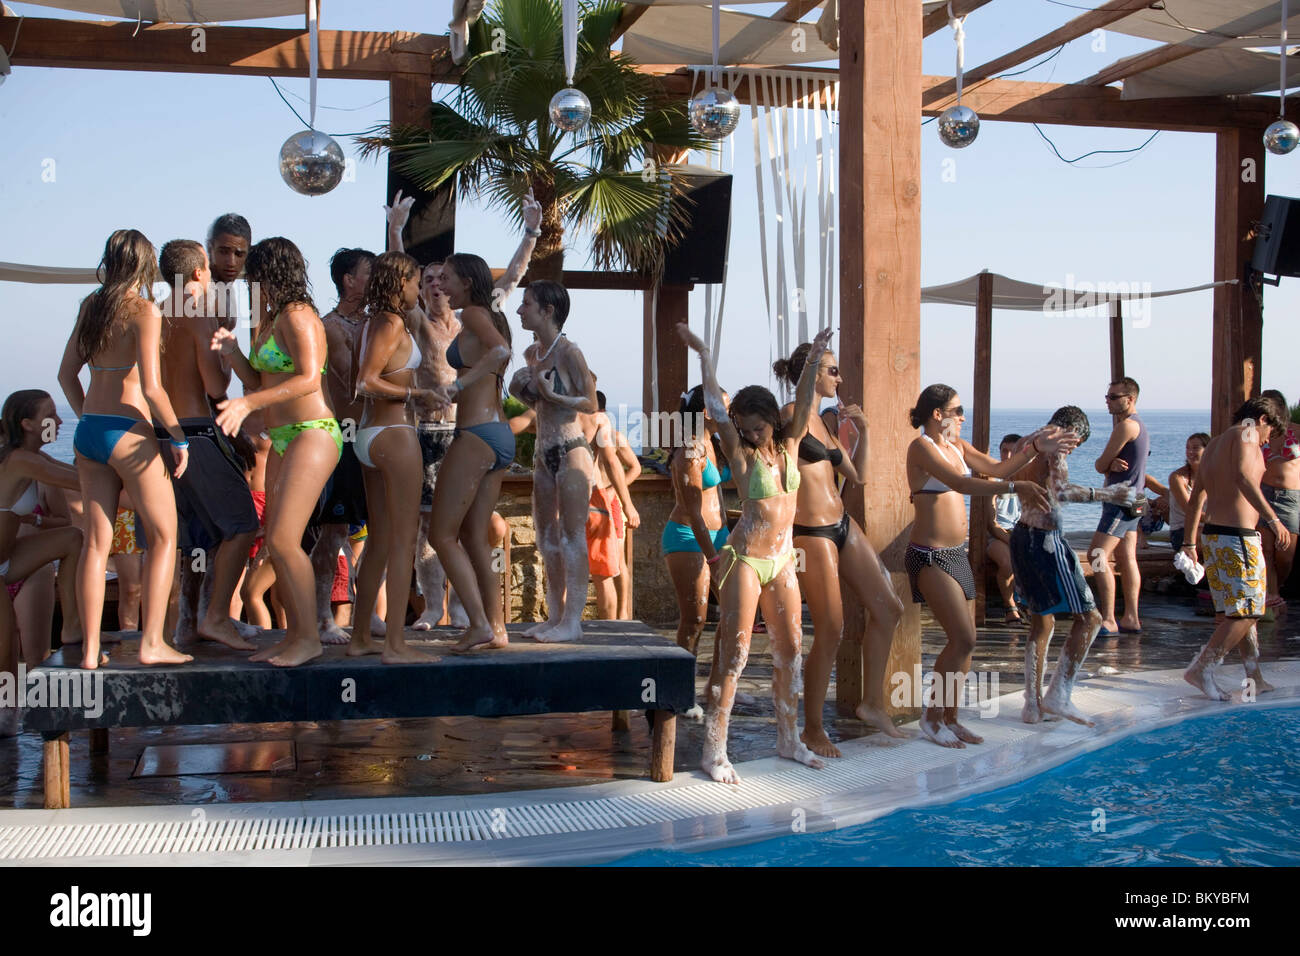 Young people dancing during a beach party at a pool of the